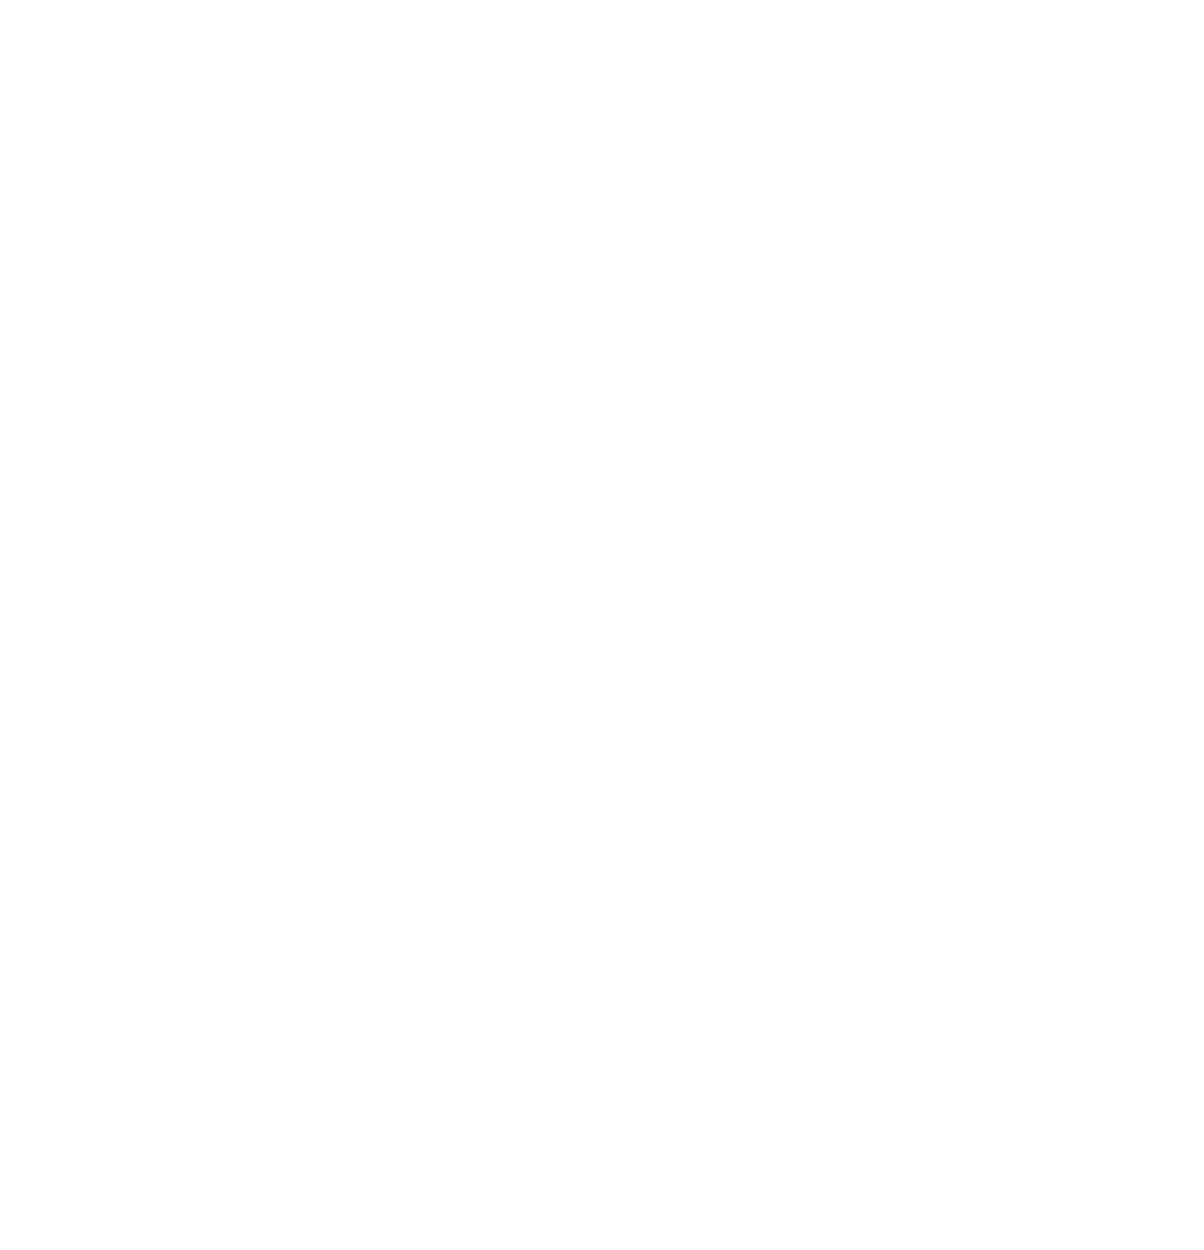 Bear Together: Holistic Birth Services - Home Birth Midwife in Austin Texas, serving Taylor, Hutto, Pflugerville, Georgetown, Round Rock, and more...